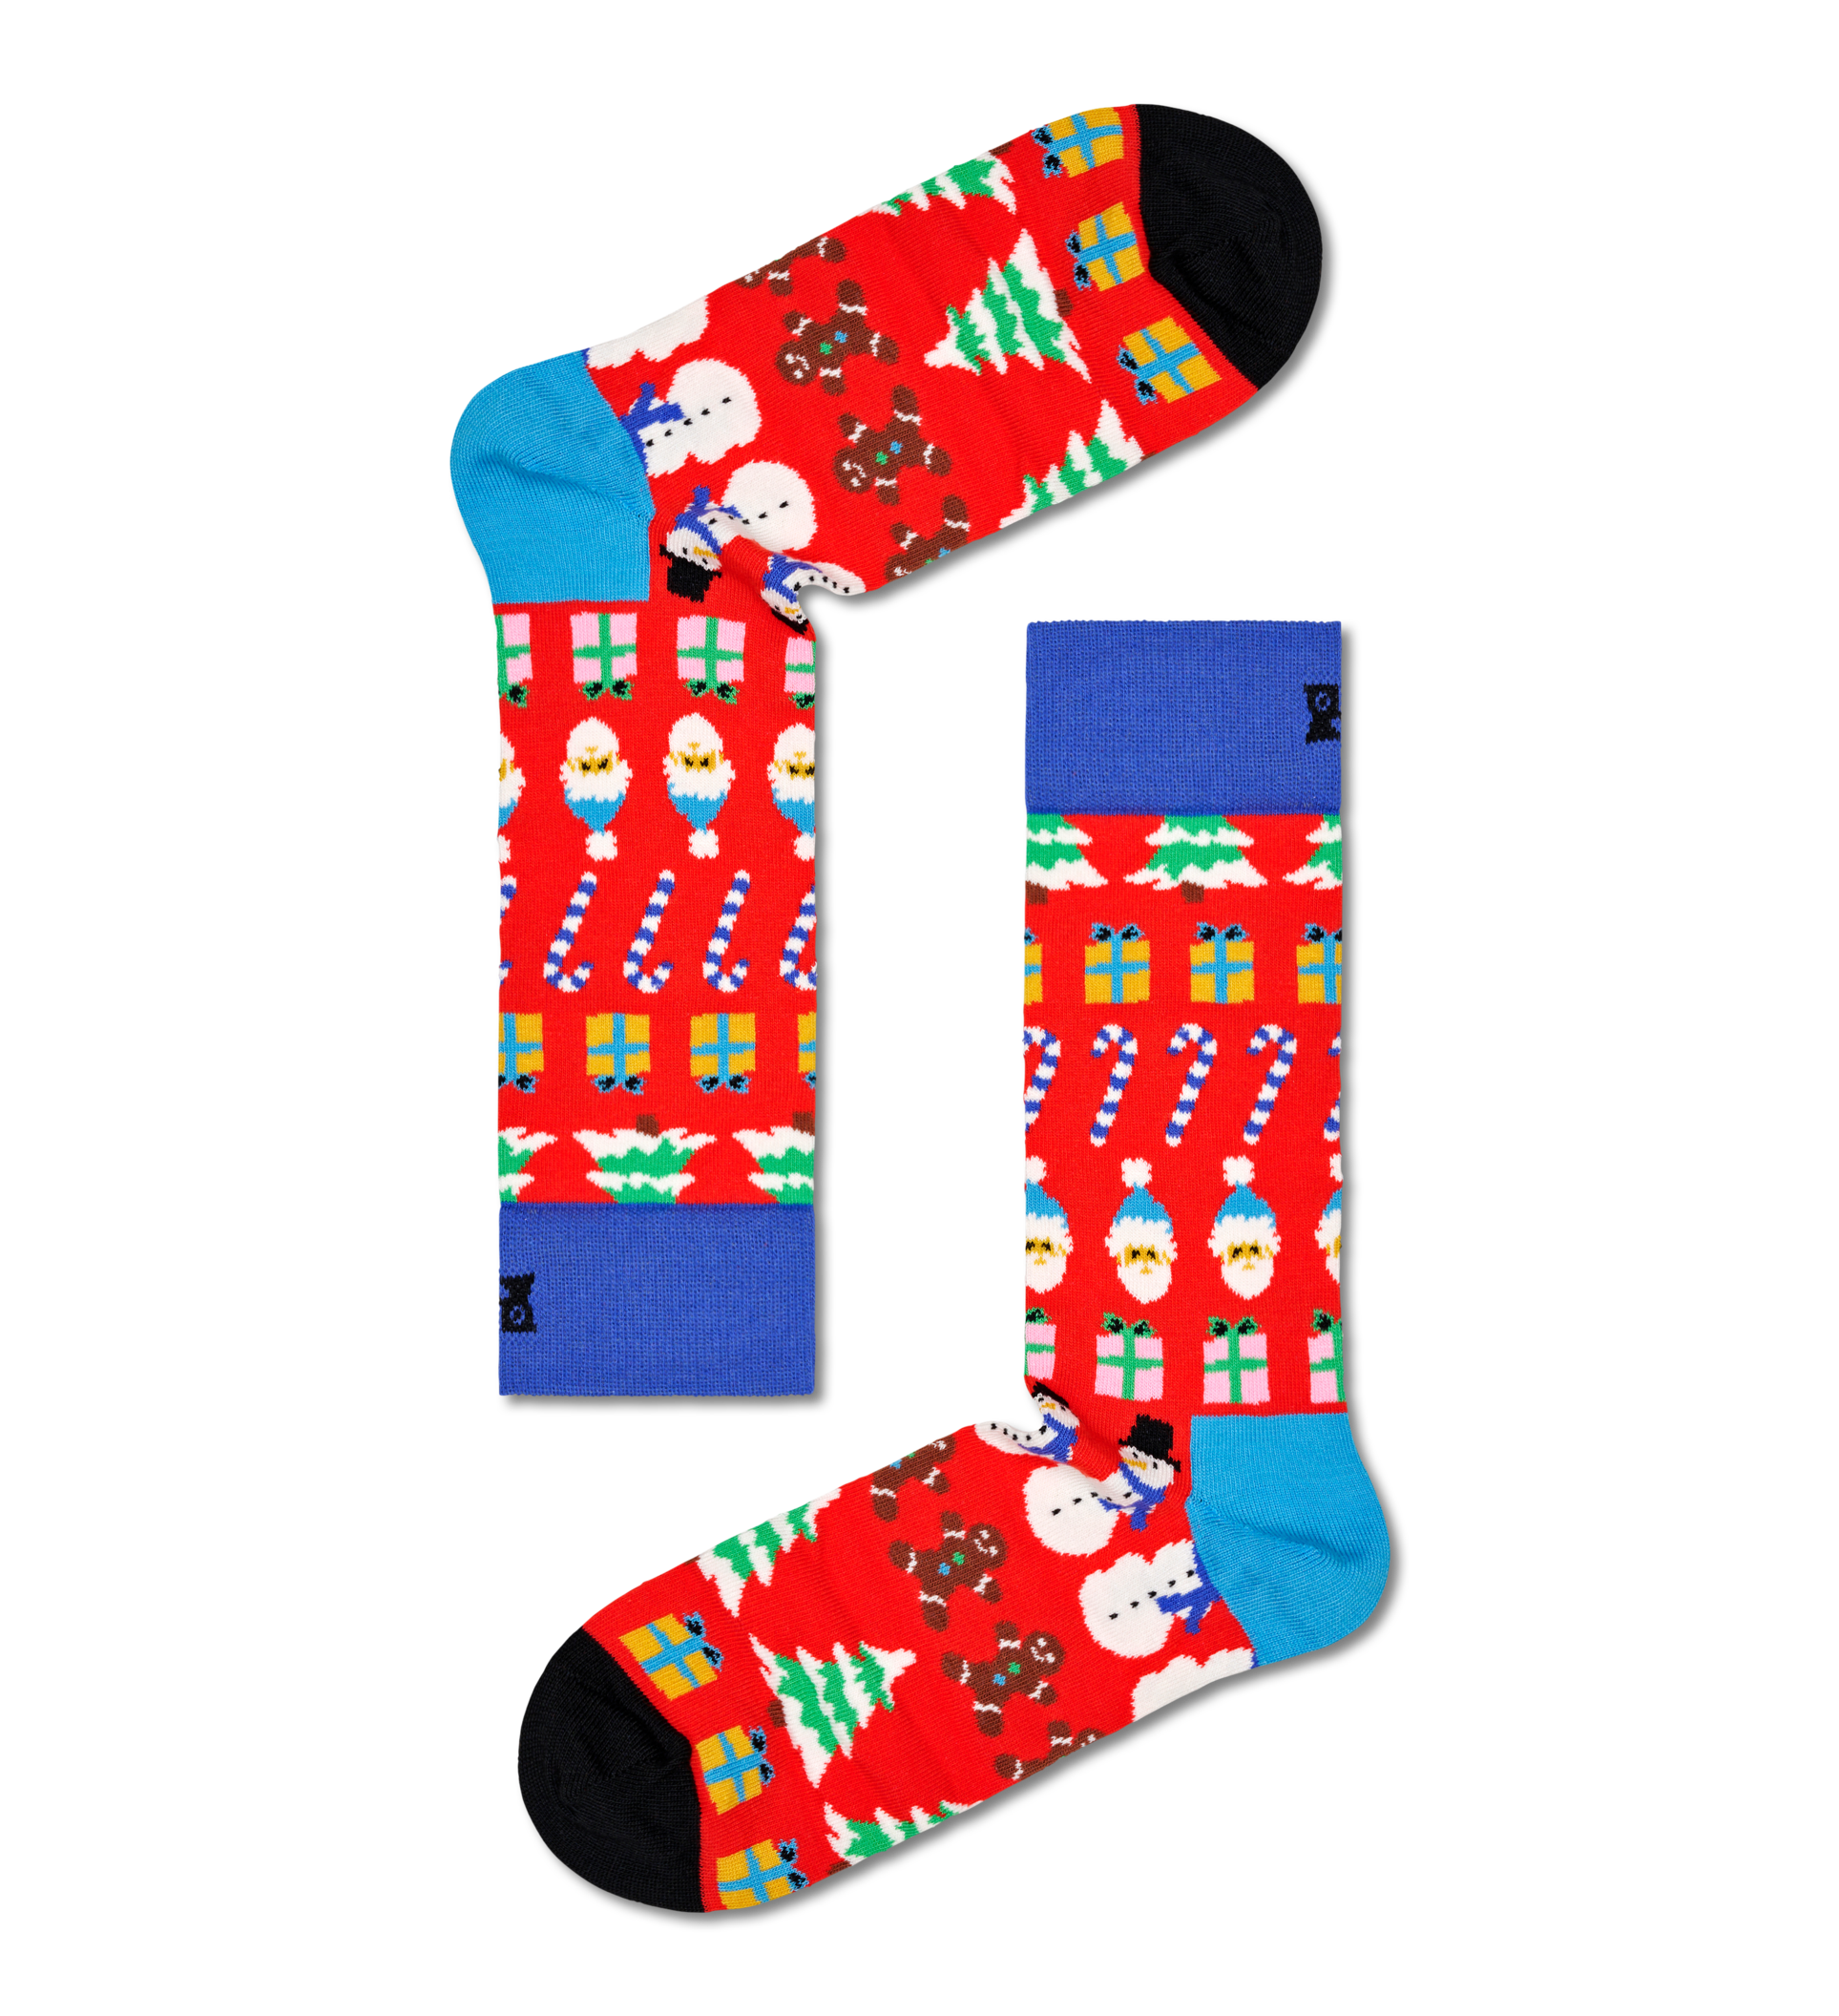 All I Want For Christmas Sock für 6€ in Happy Socks